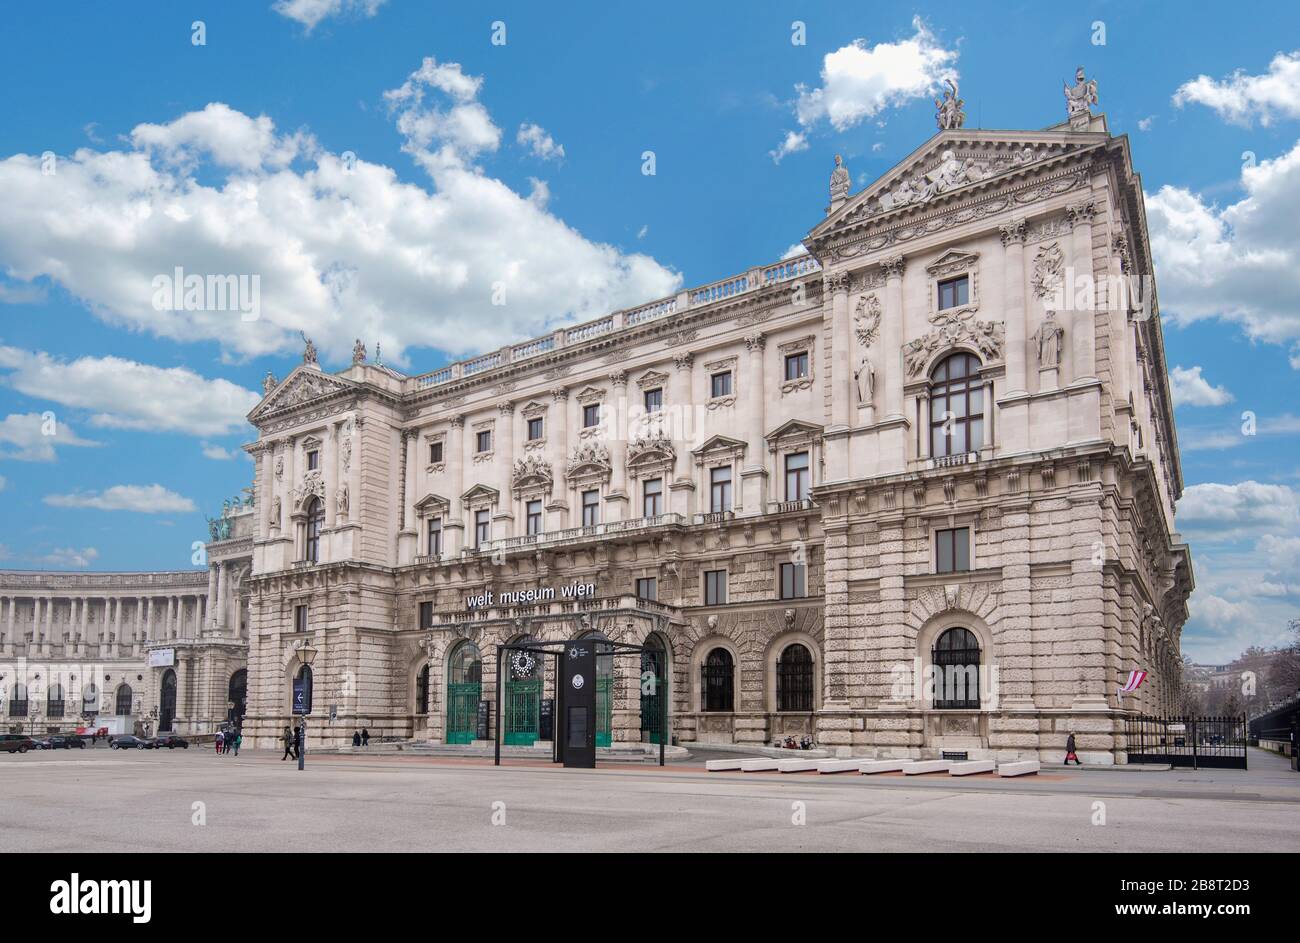 Vienna, Austria. The Museum of Ethnology (Weltmuseum) in Wien is the largest anthropological museum in Austria, In the Hofburg Imperial Palace Stock Photo